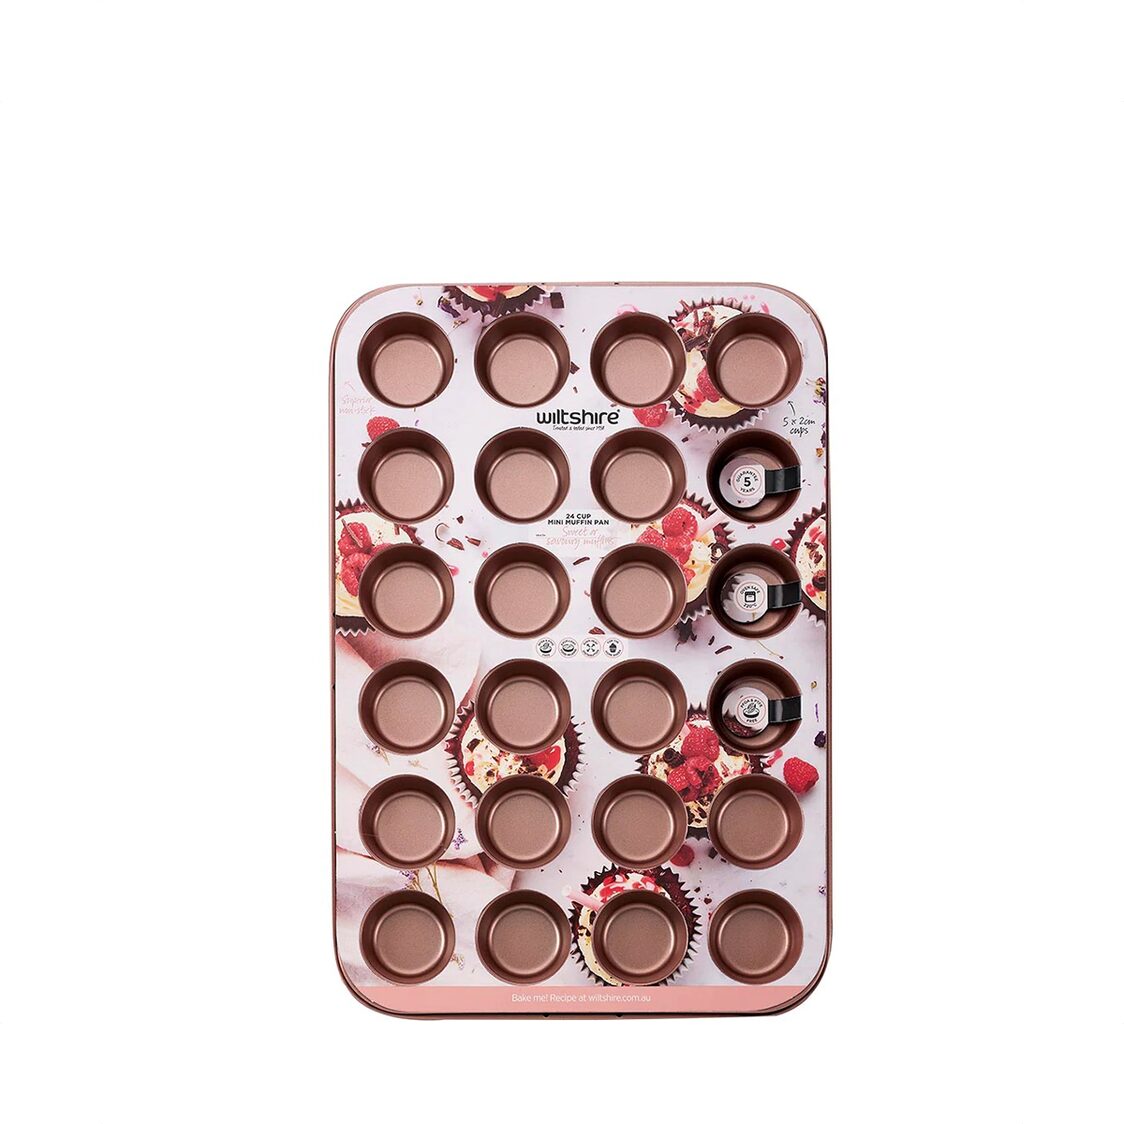 Wiltshire Rose Gold 24 Cup Muffin Pan 40757